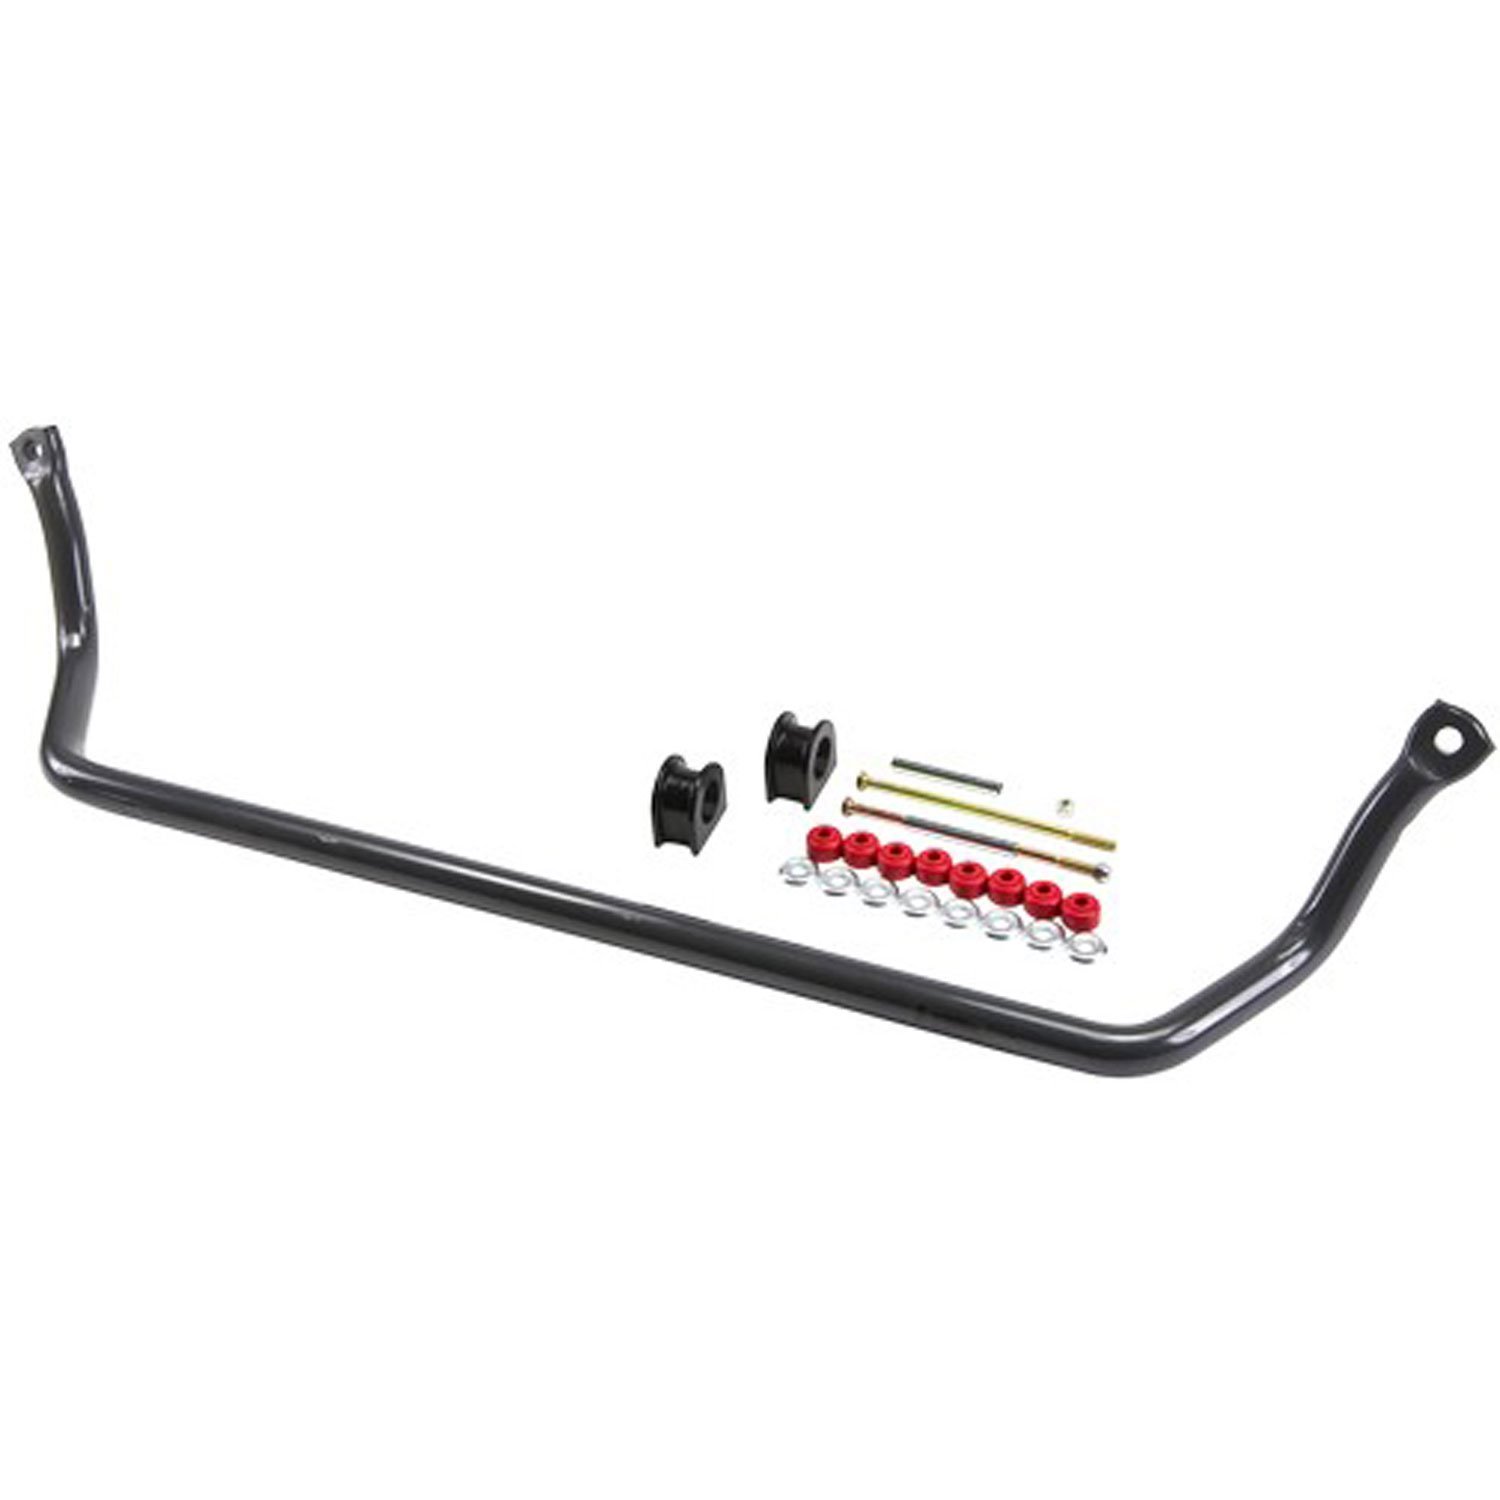 Front Sway Bar Kit for 1995-1999 Chevy Tahoe/Yukon 4dr, 4WD